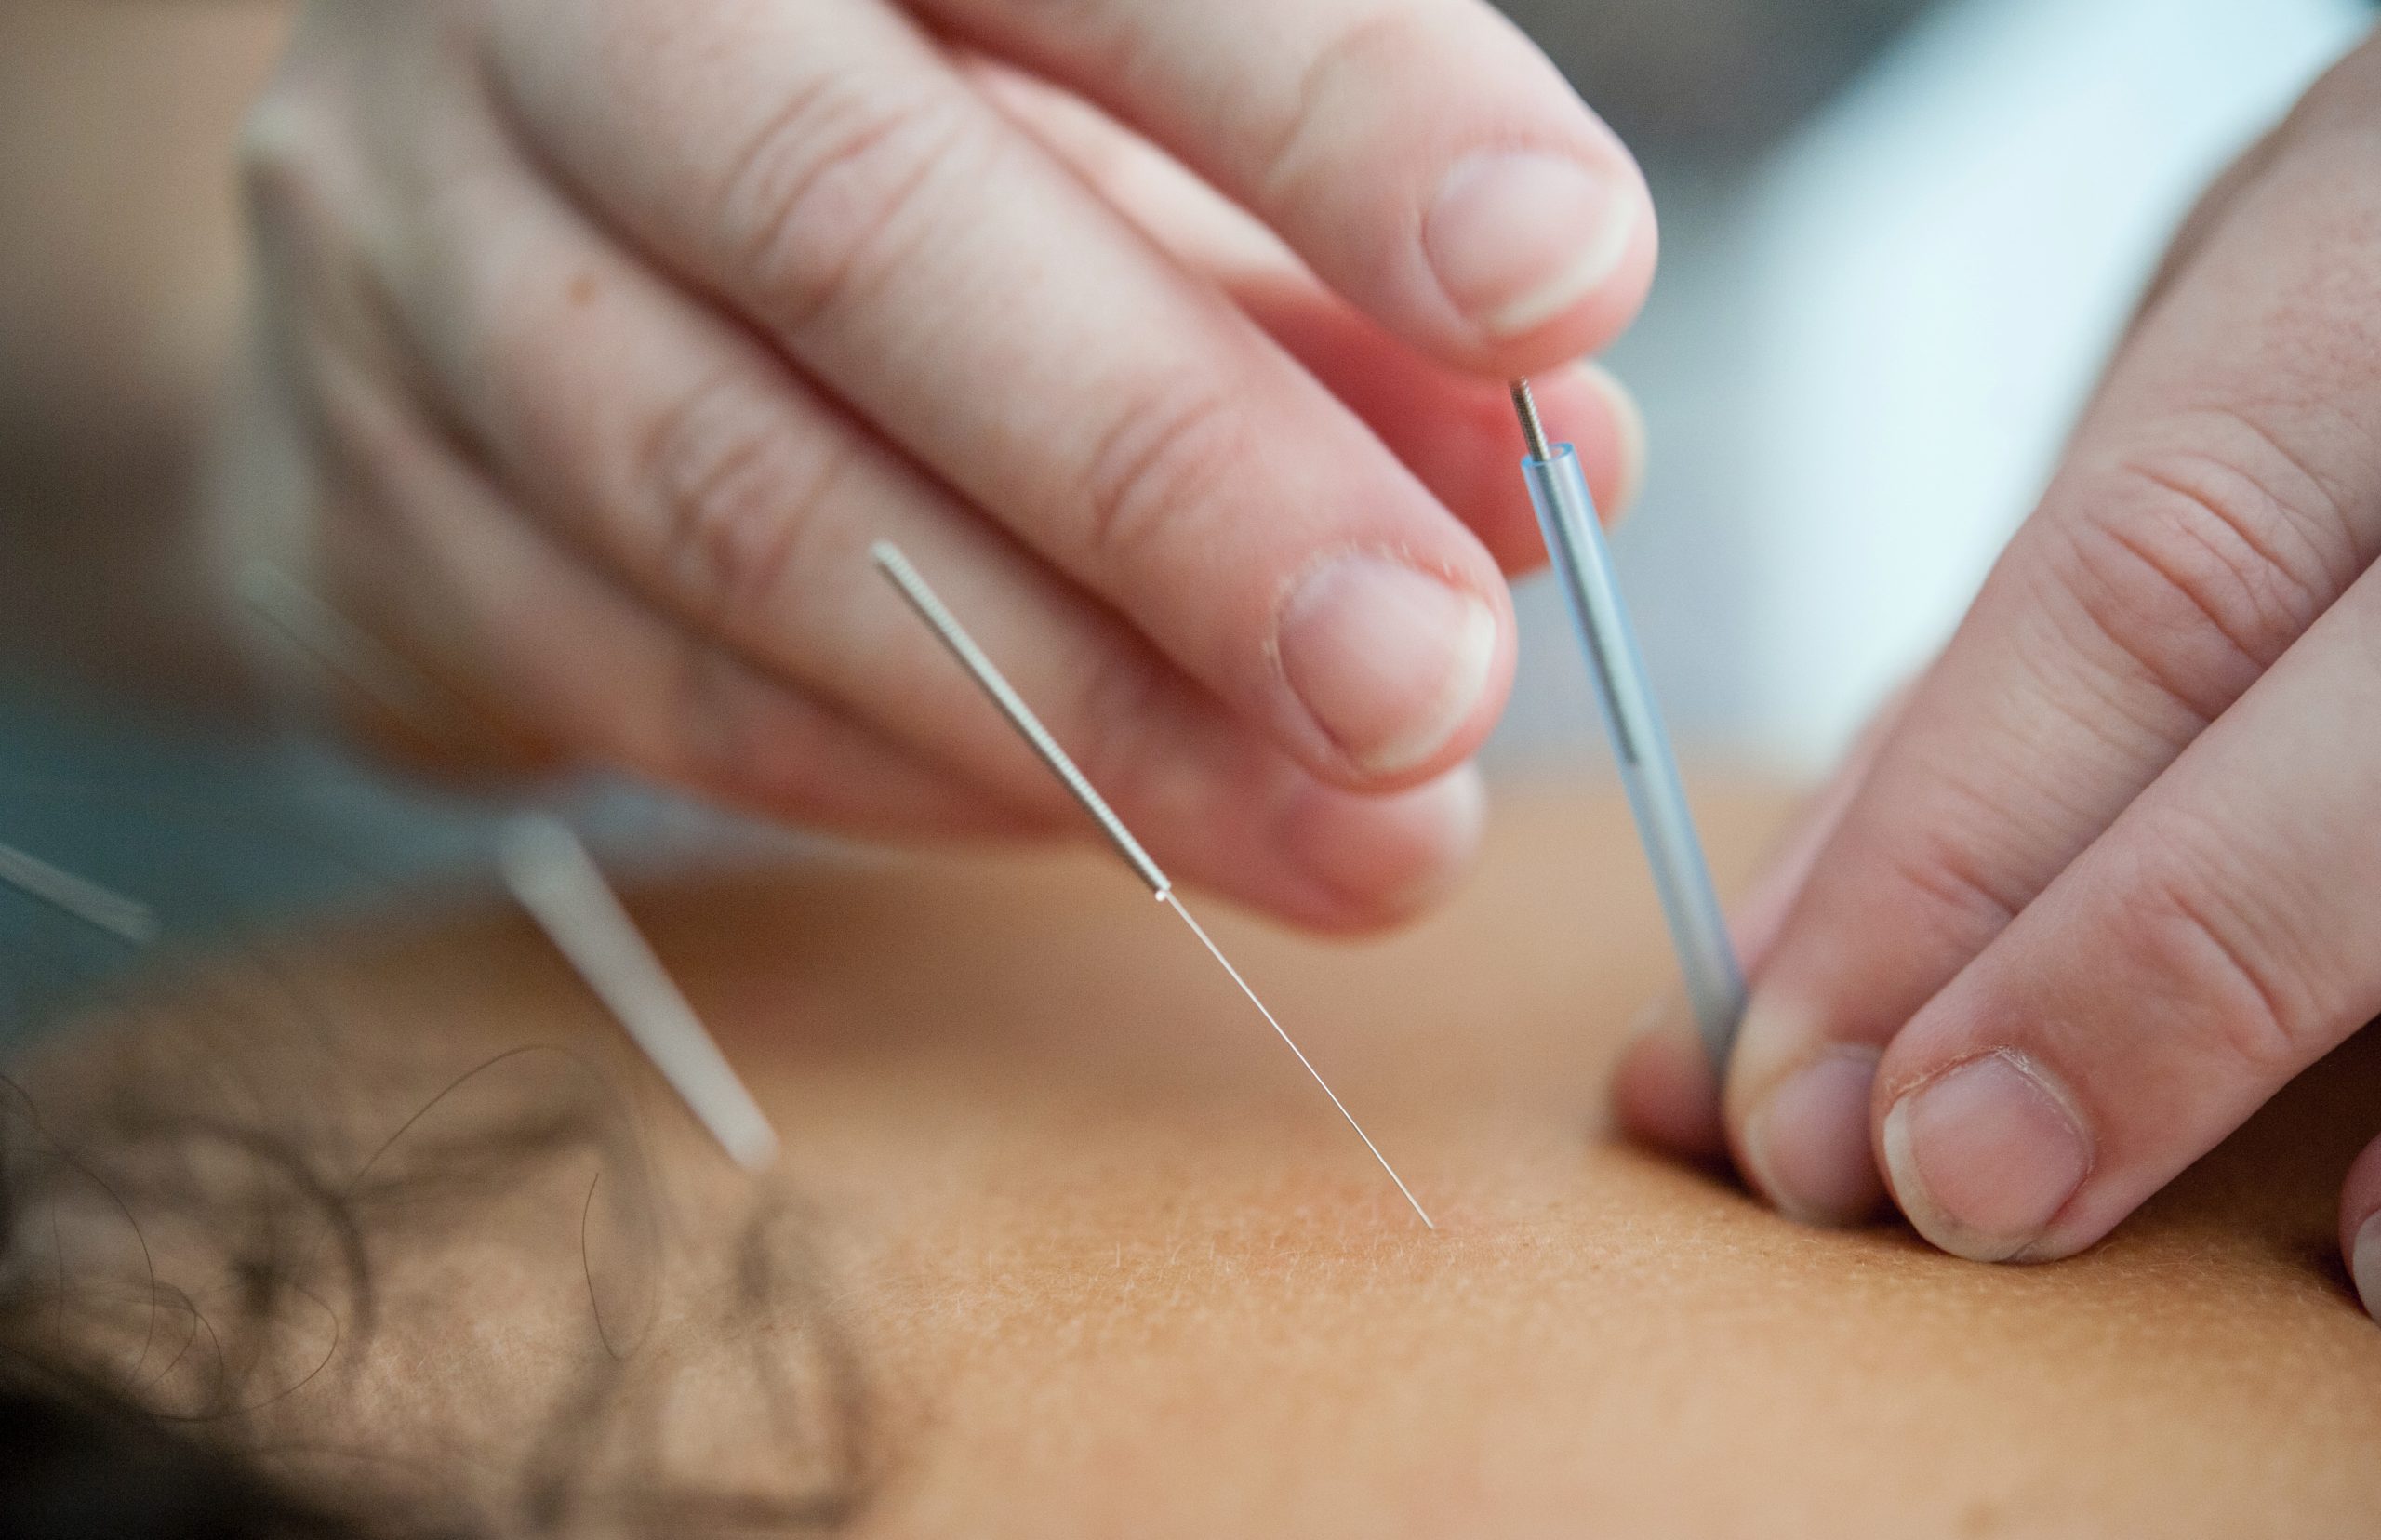 Add Some Needle To Your Digital Sleeve With Acupuncture SEO Services